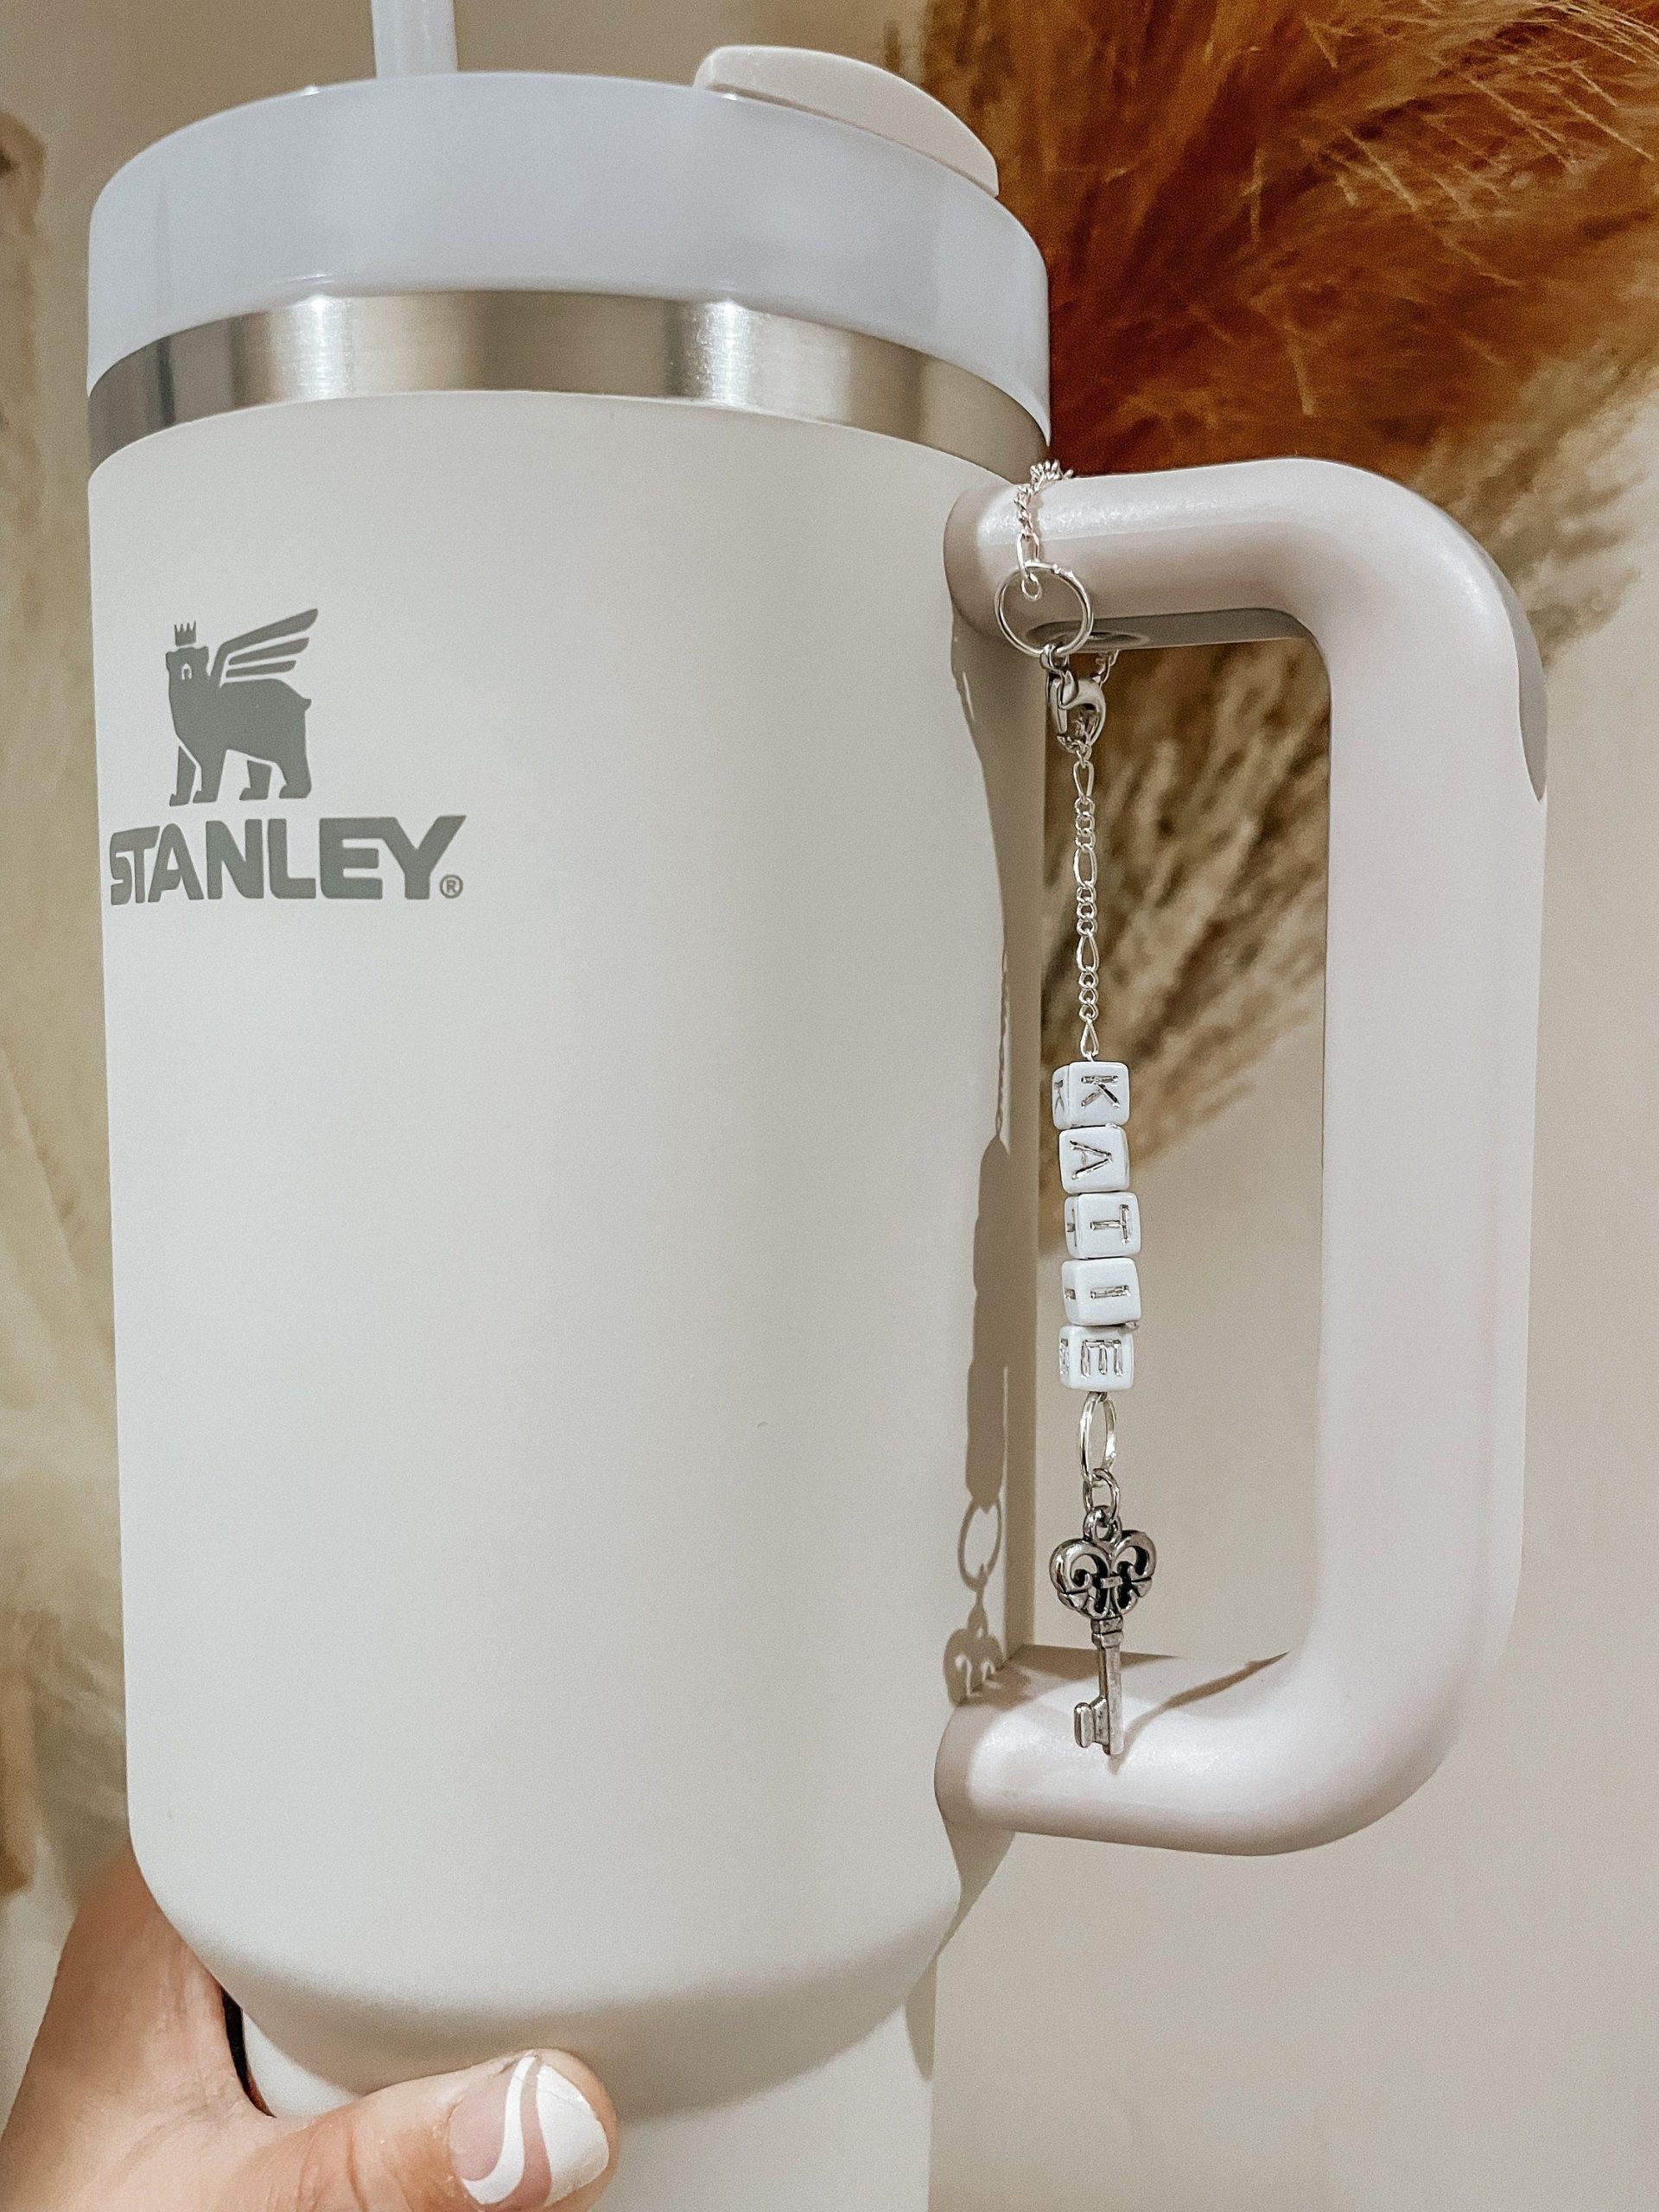 The Cutest Stanley Tumbler Accessory Just Went on Sale on